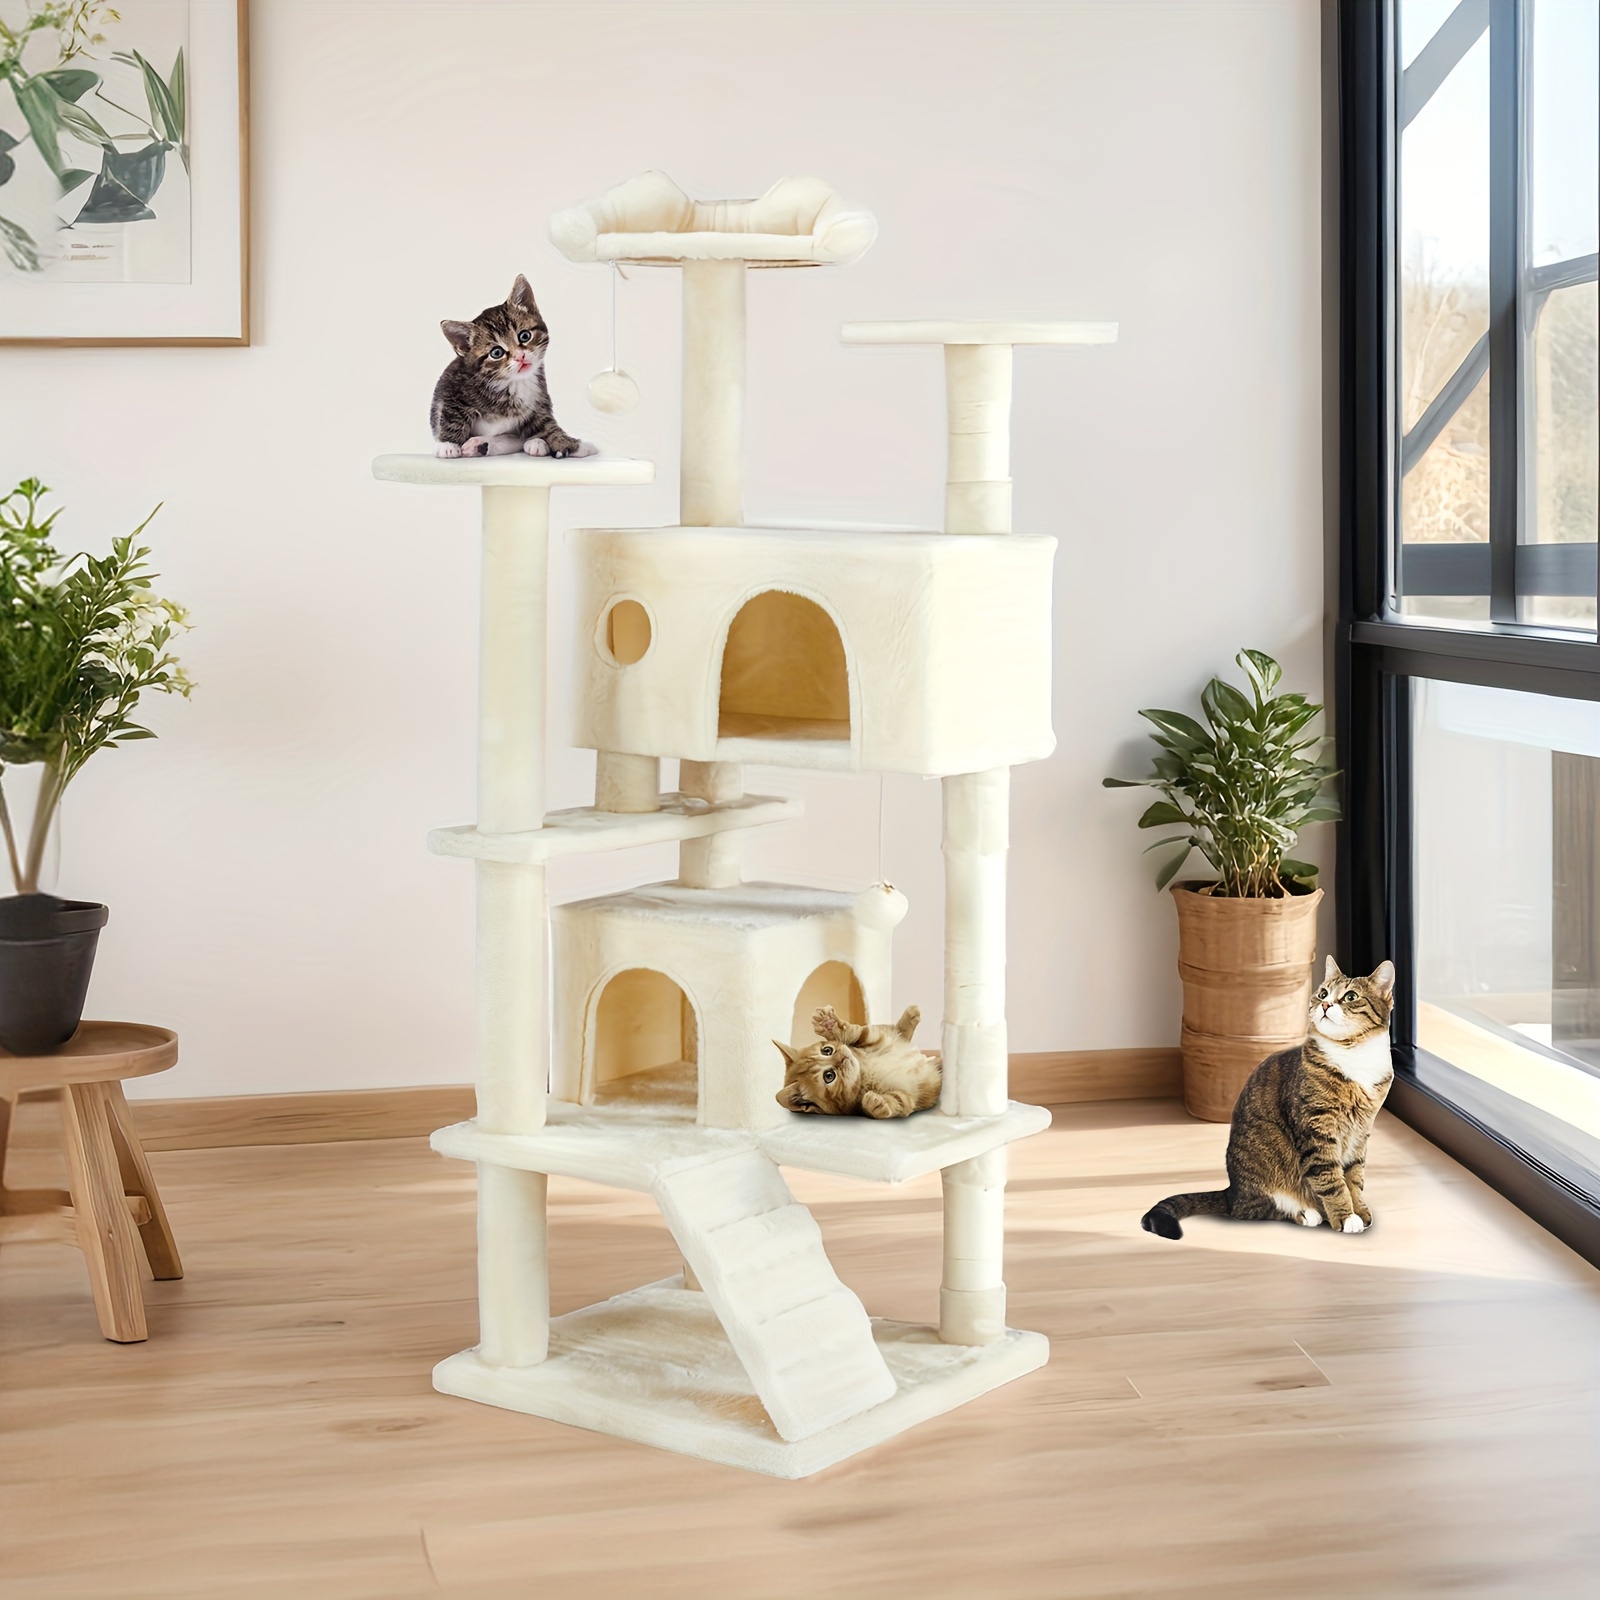 

54in Cat Tree Tower For Indoor Cats, Multi-level Pet Furniture, Kitty Play House With Sisal Scratching Post, Large Condo, Climbing Ladder, Plush Toy For Kitten, Beige And Gray